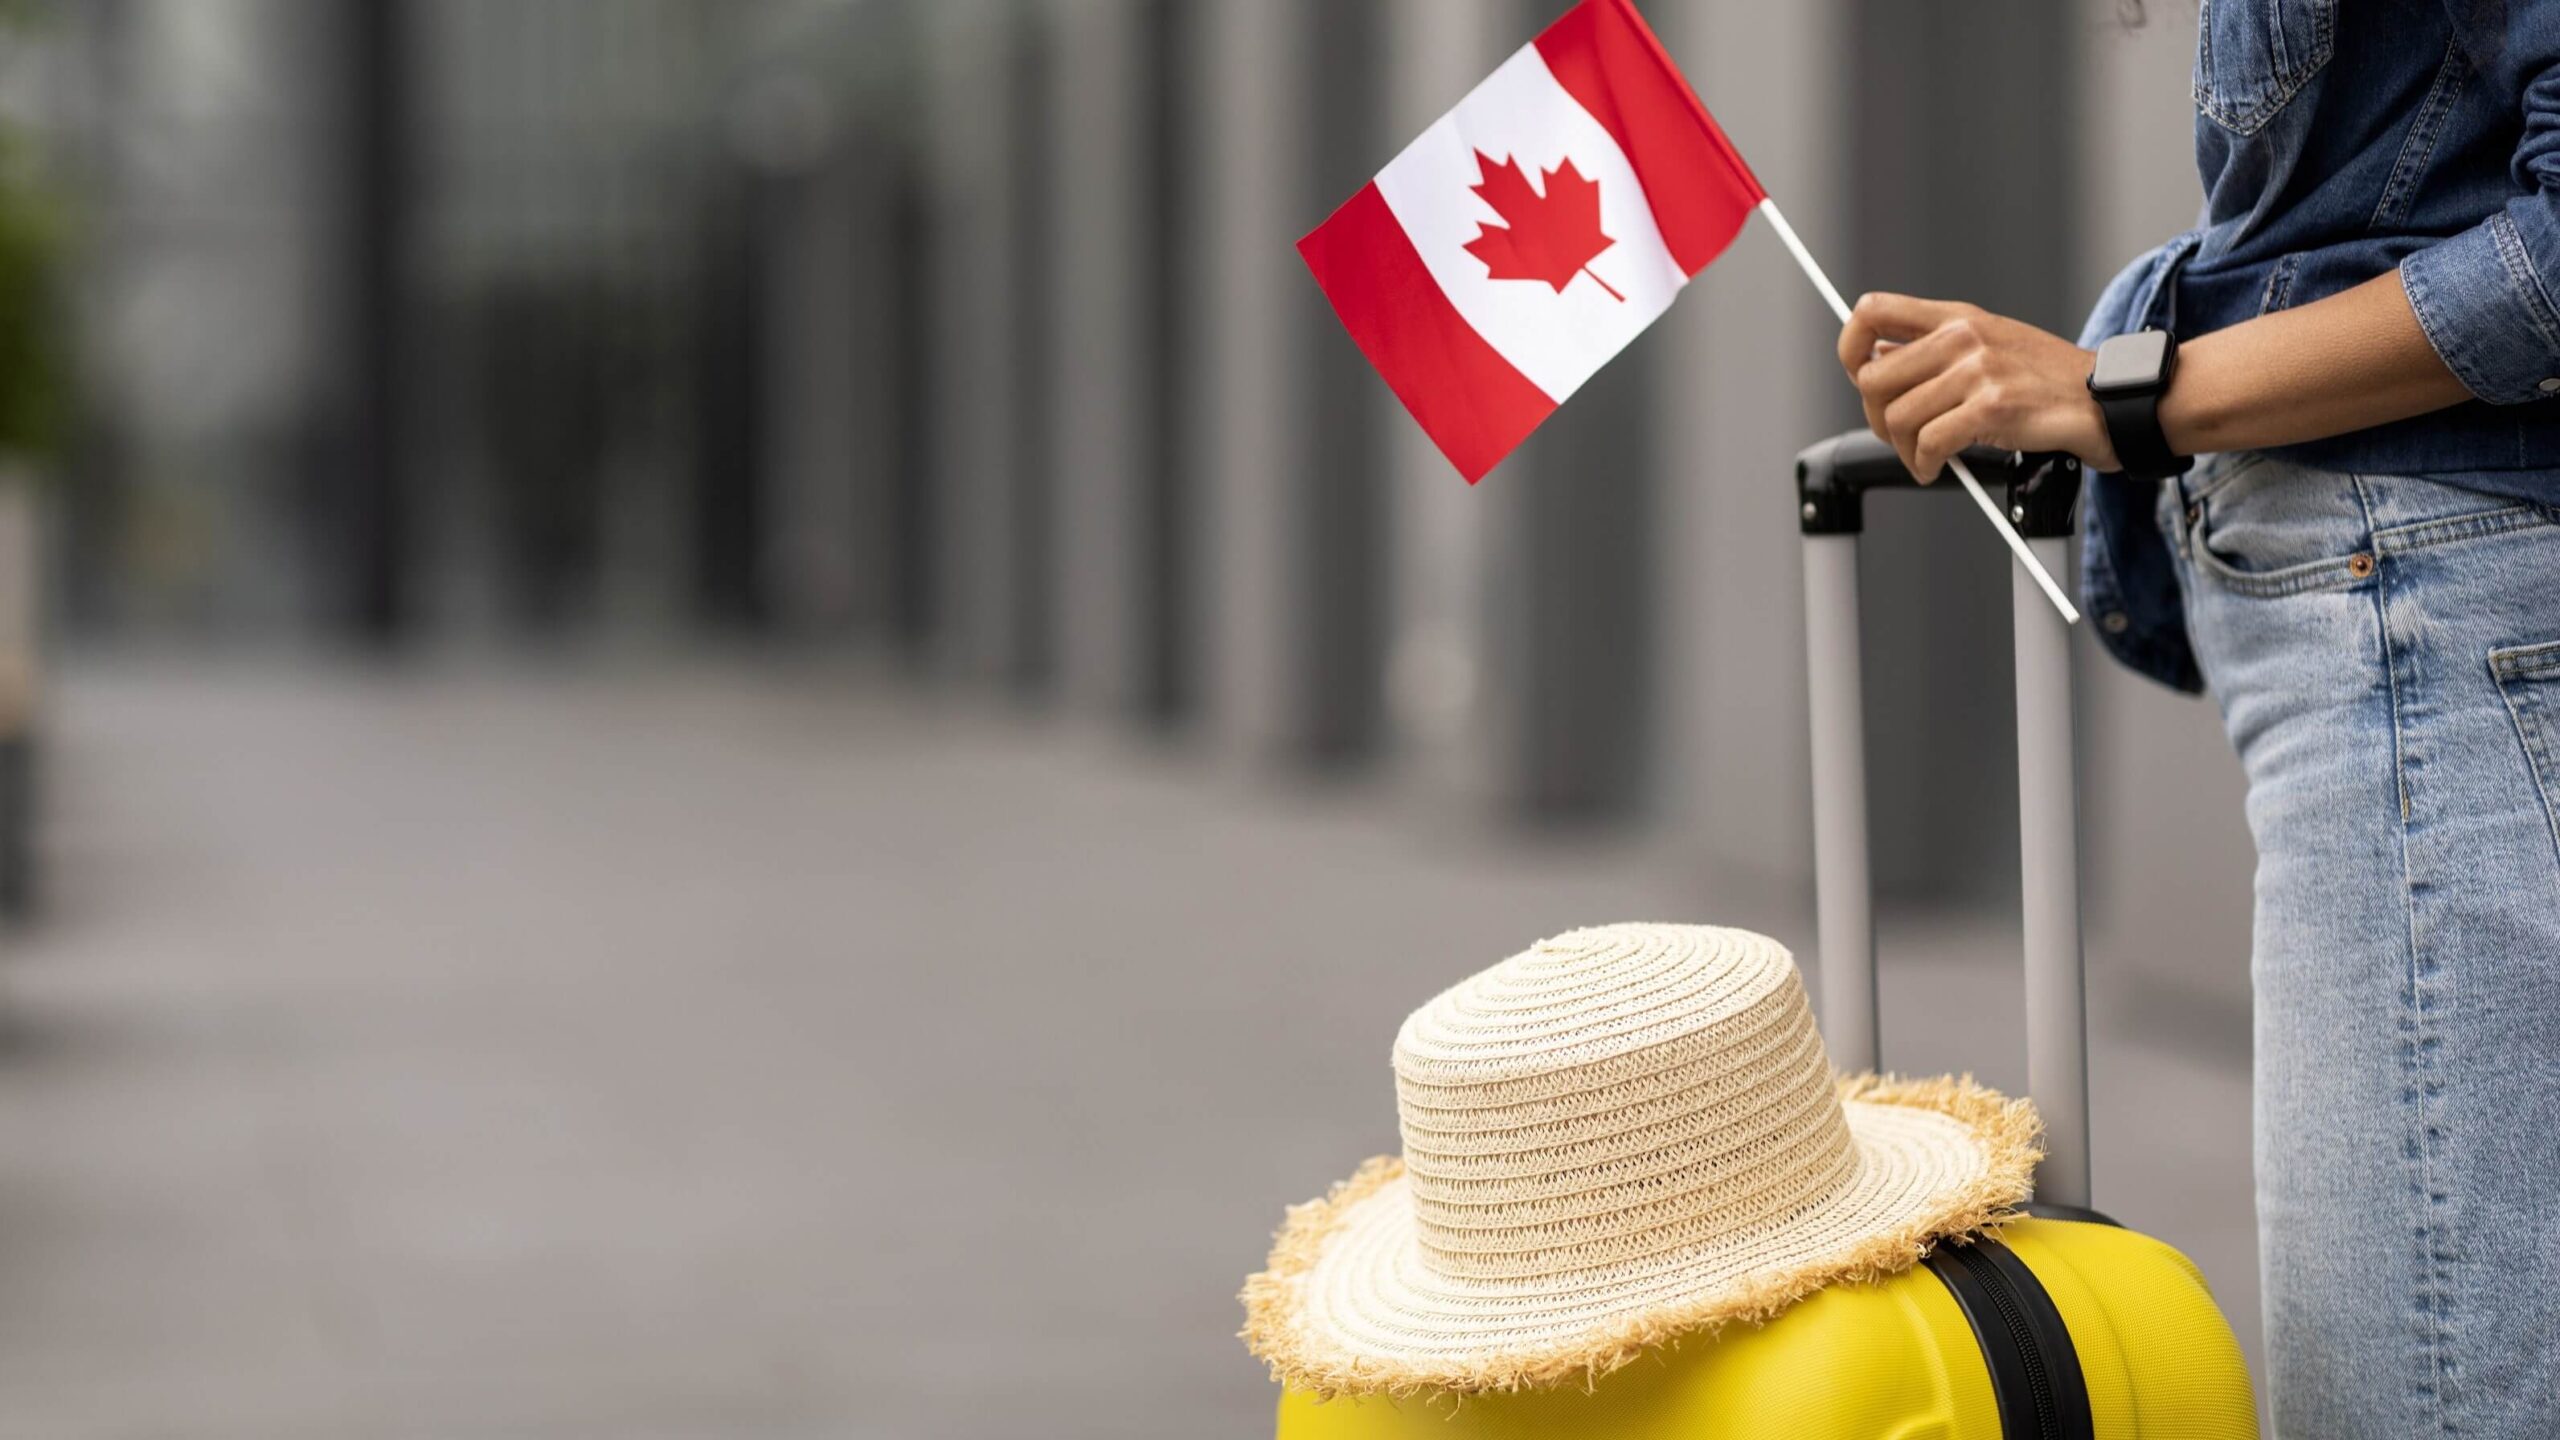 A photo f a person holding a suitcase and a Canadian flag